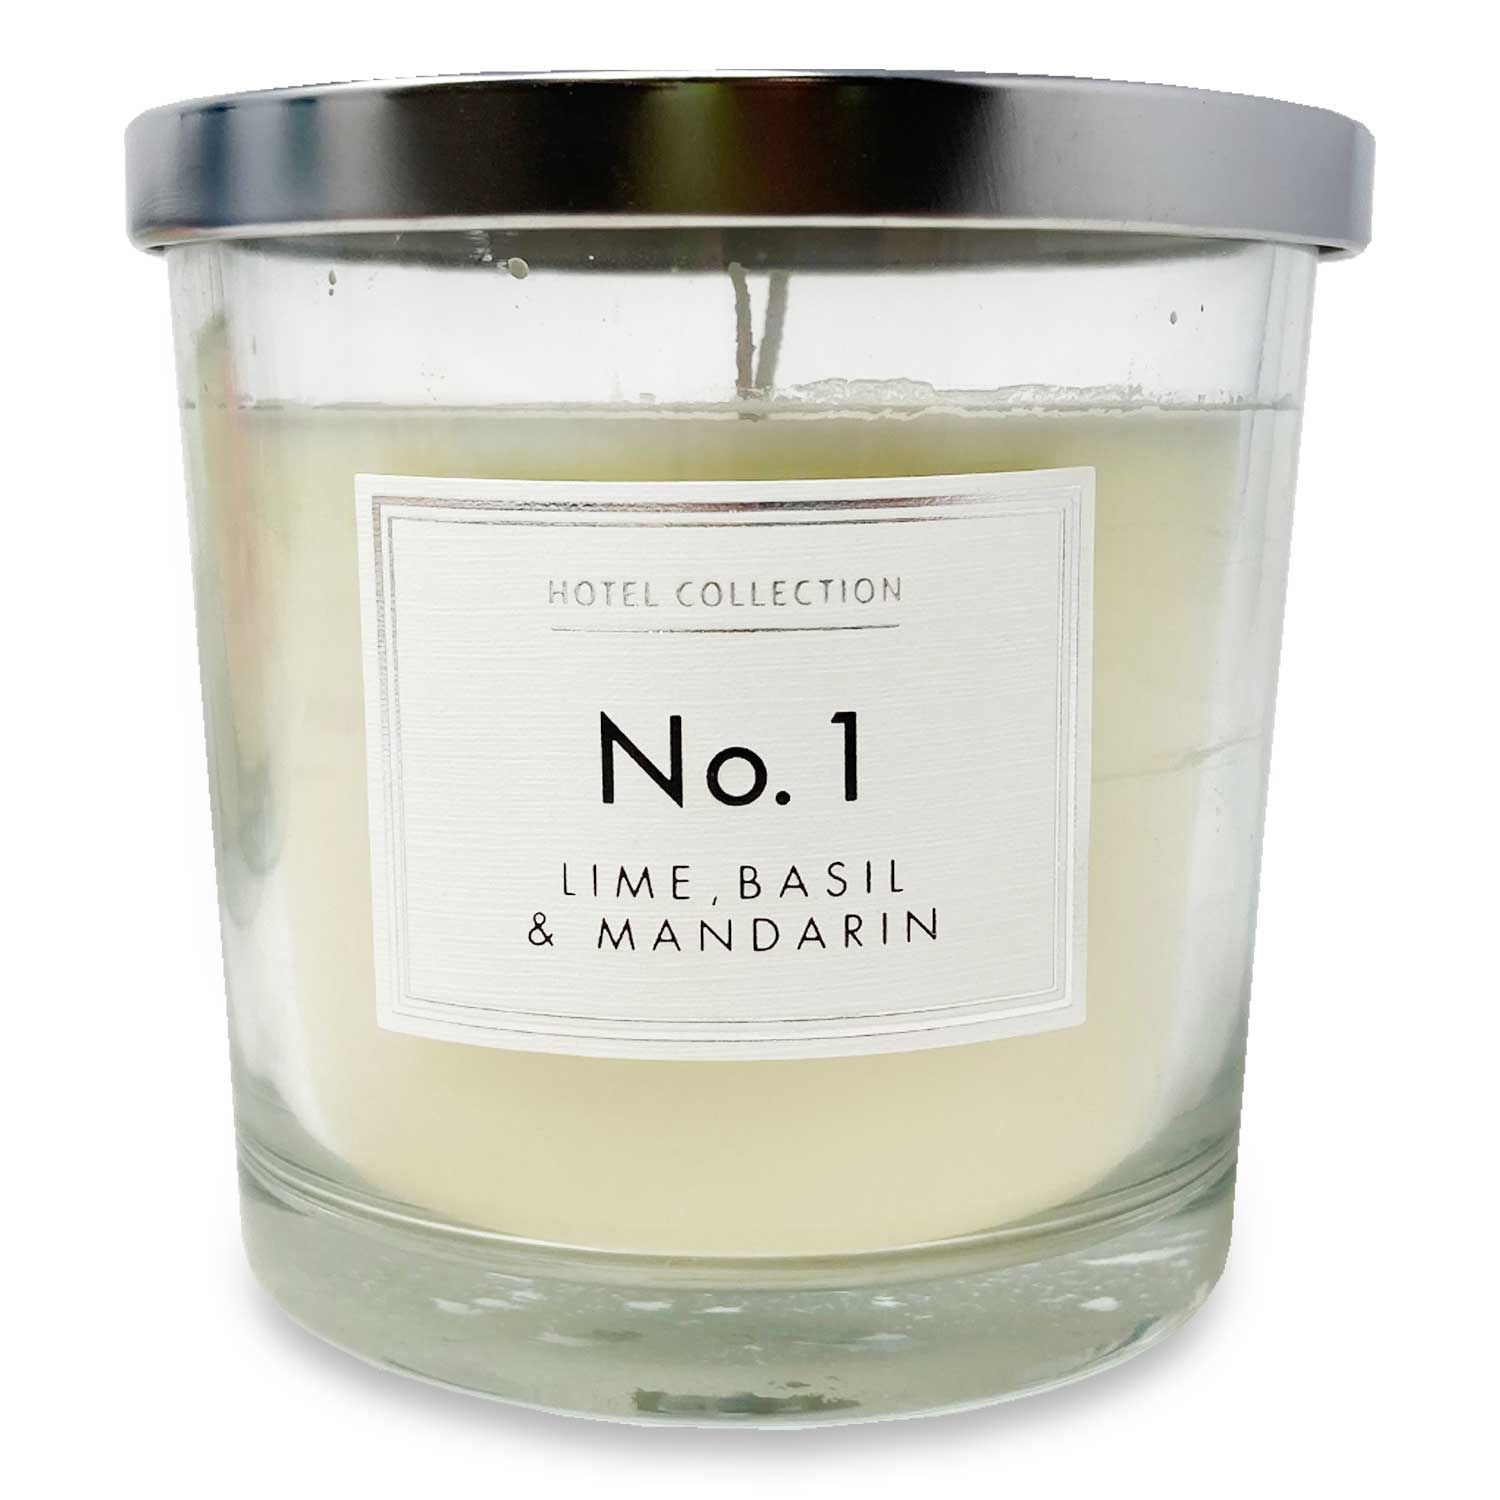 Hotel Collection N°1 Lime, Basil & Mandarin Candle 335g RRP £3.49 CLEARANCE XL £2.99